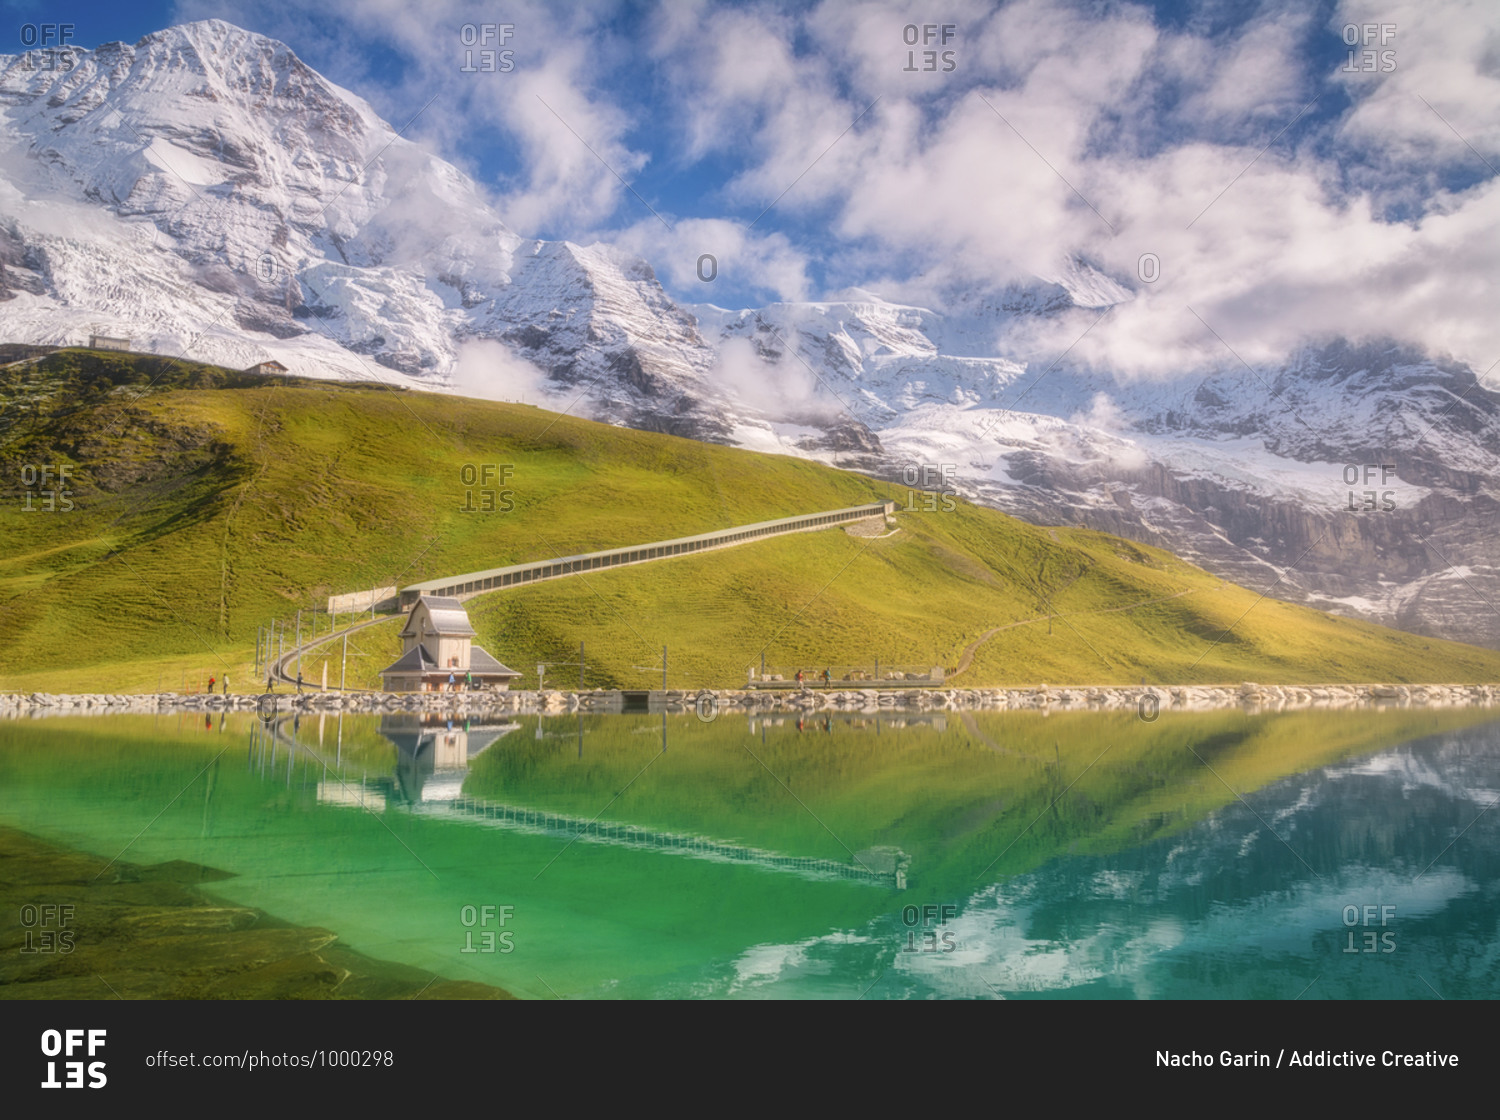 Majestic view of river with transparent water near green mountains with railroad and small house under snowy ridge with cloudy sky